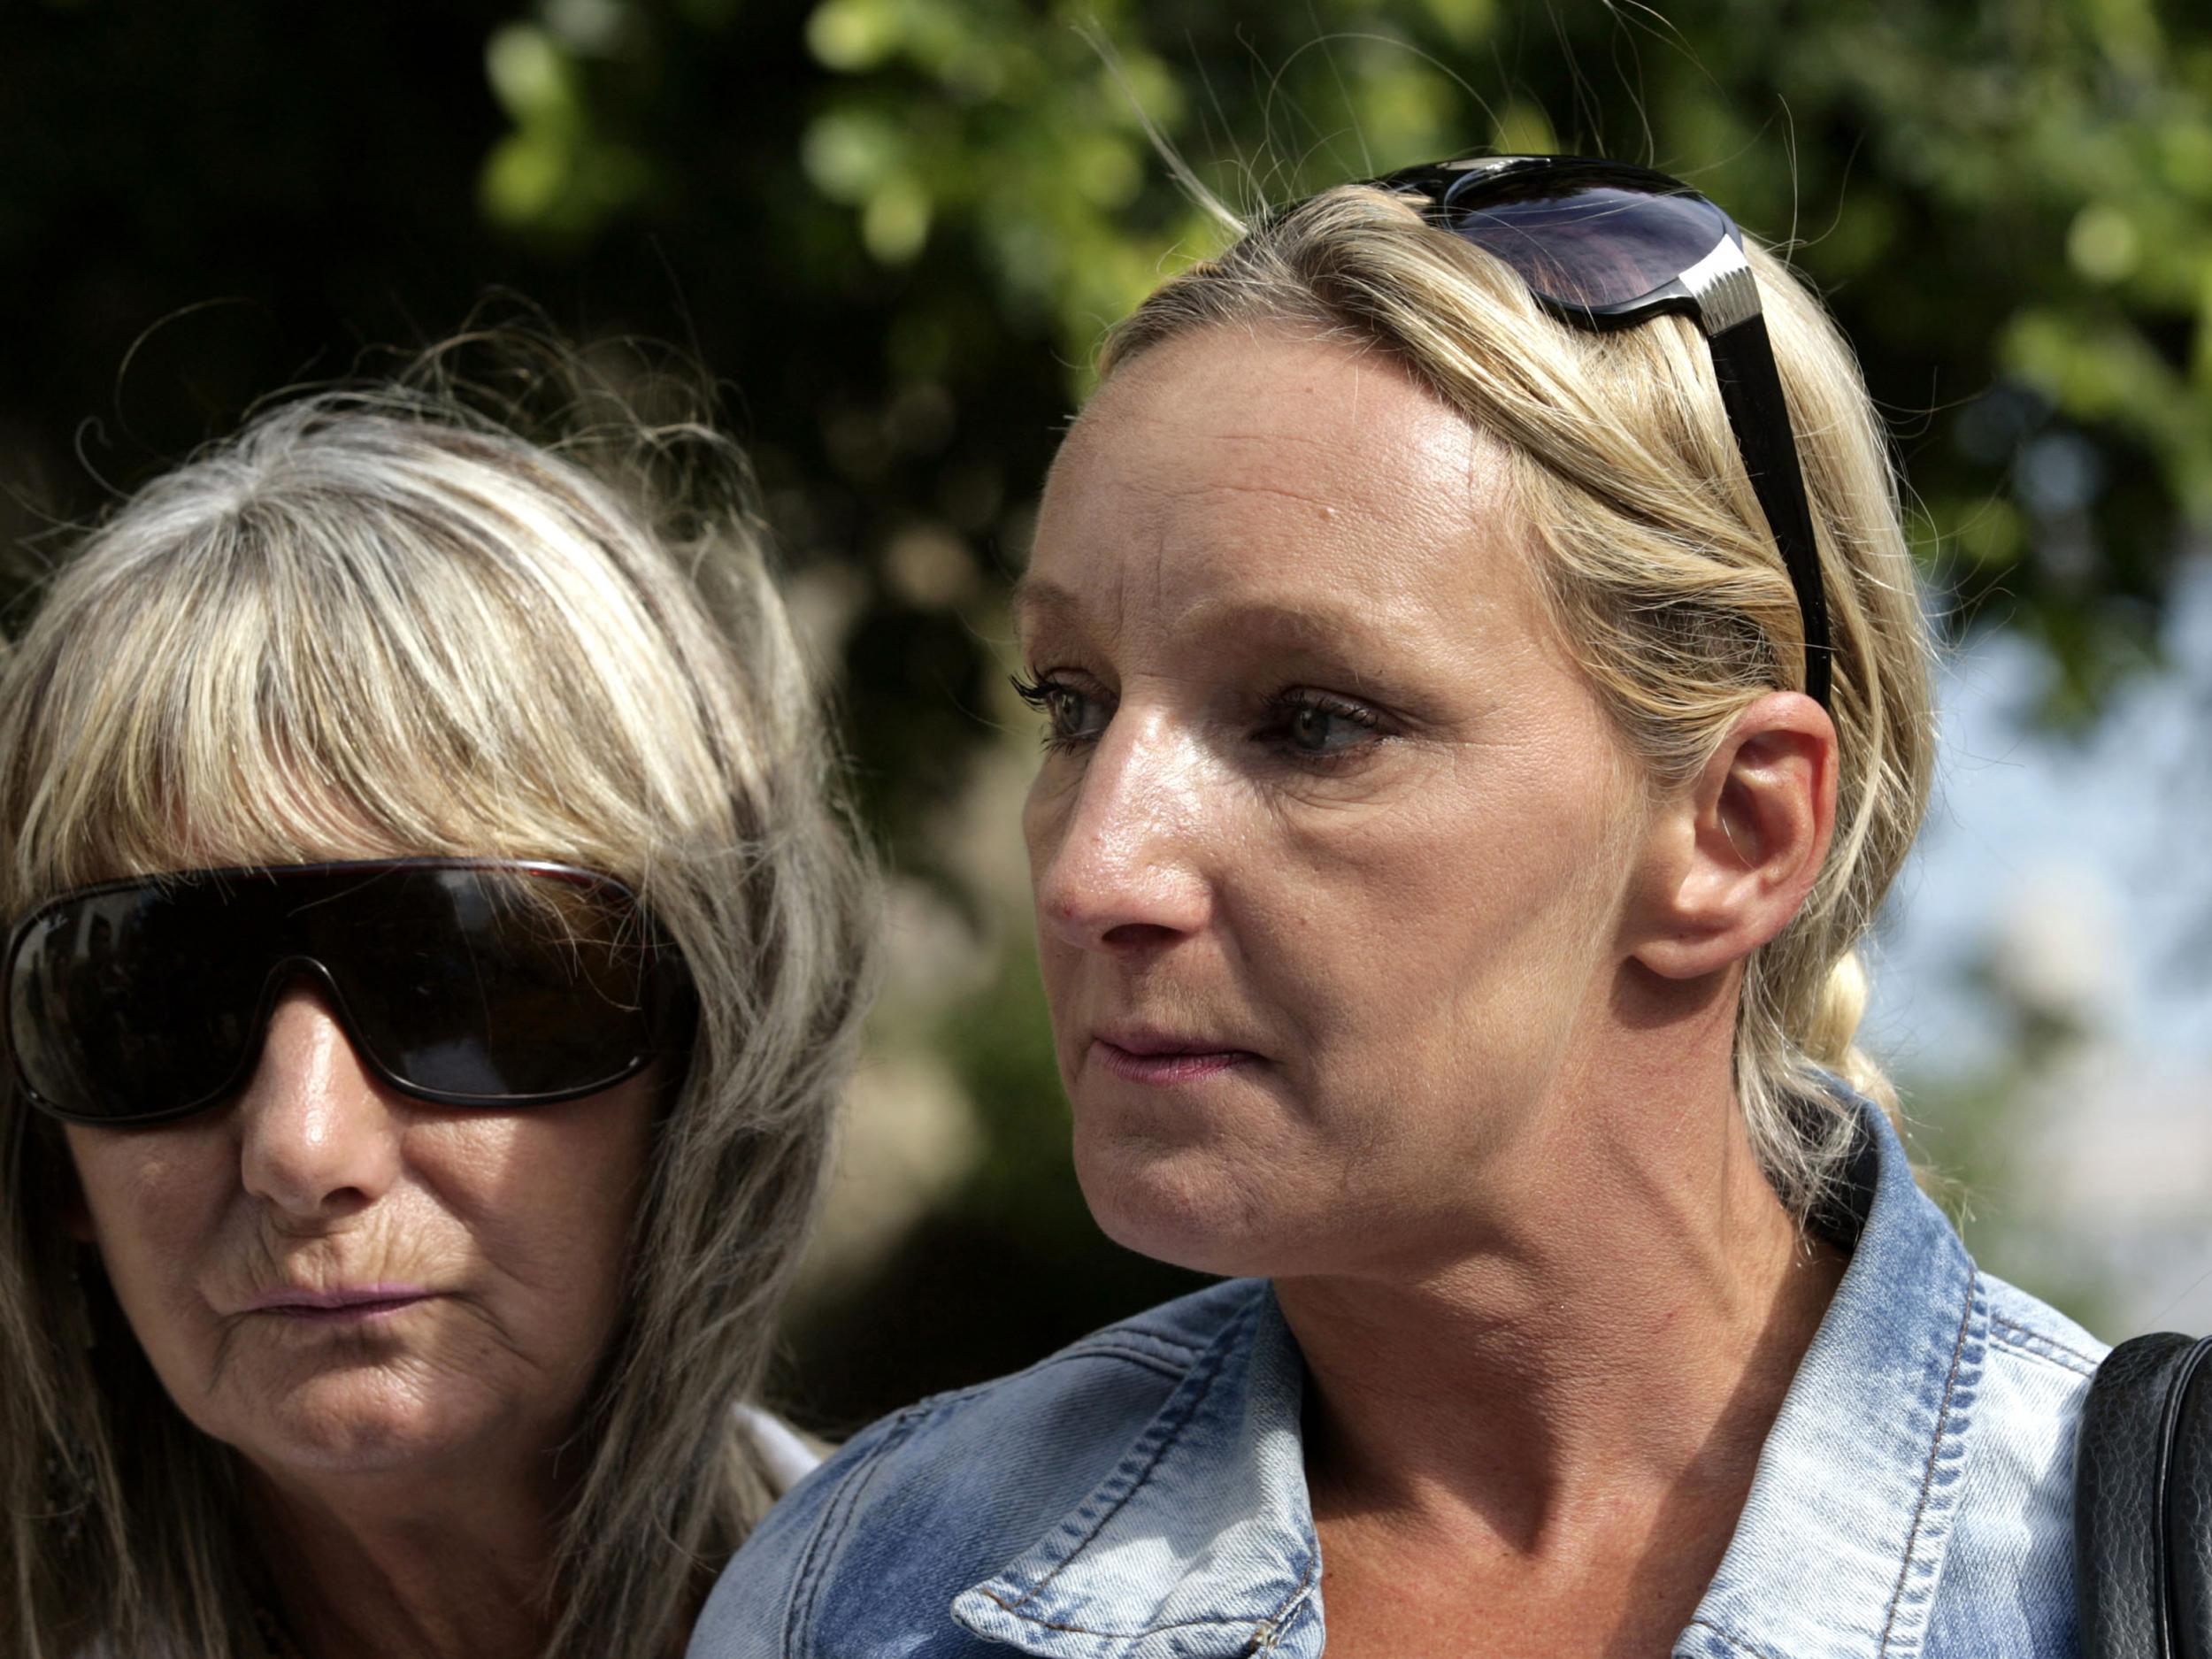 Kerry Needham, 41, mother of Ben Needham and his grandmother Christine (L) are seen outside the police station on the island of Kos in October 2012